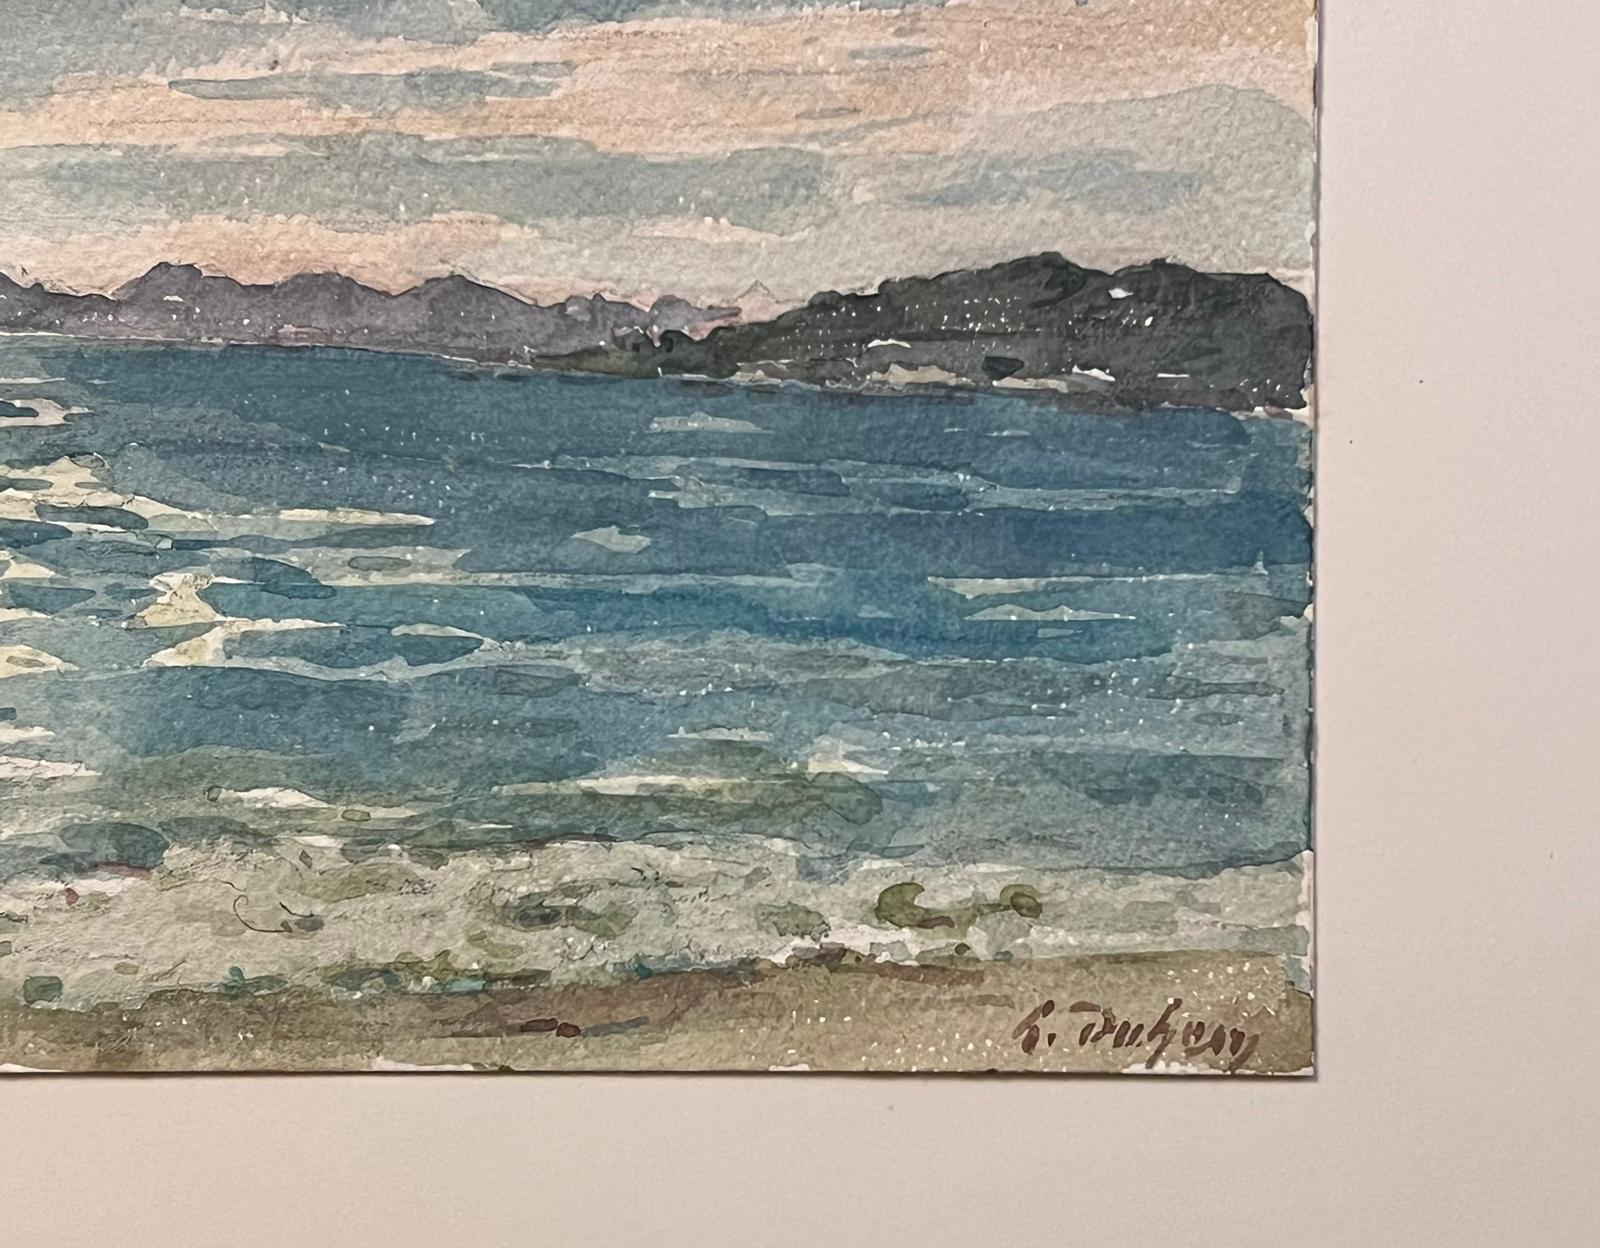 The artist: 
Henri Aime Duhem (1860-1941) French *see notes below, signed 

Title: The Blue Sea

Medium:  
gouache on paper, loosely laid over card, unframed

card: 9.75 x 12.75 inches
painting: 5 x 7 inches, 

Provenance: 
private collection of